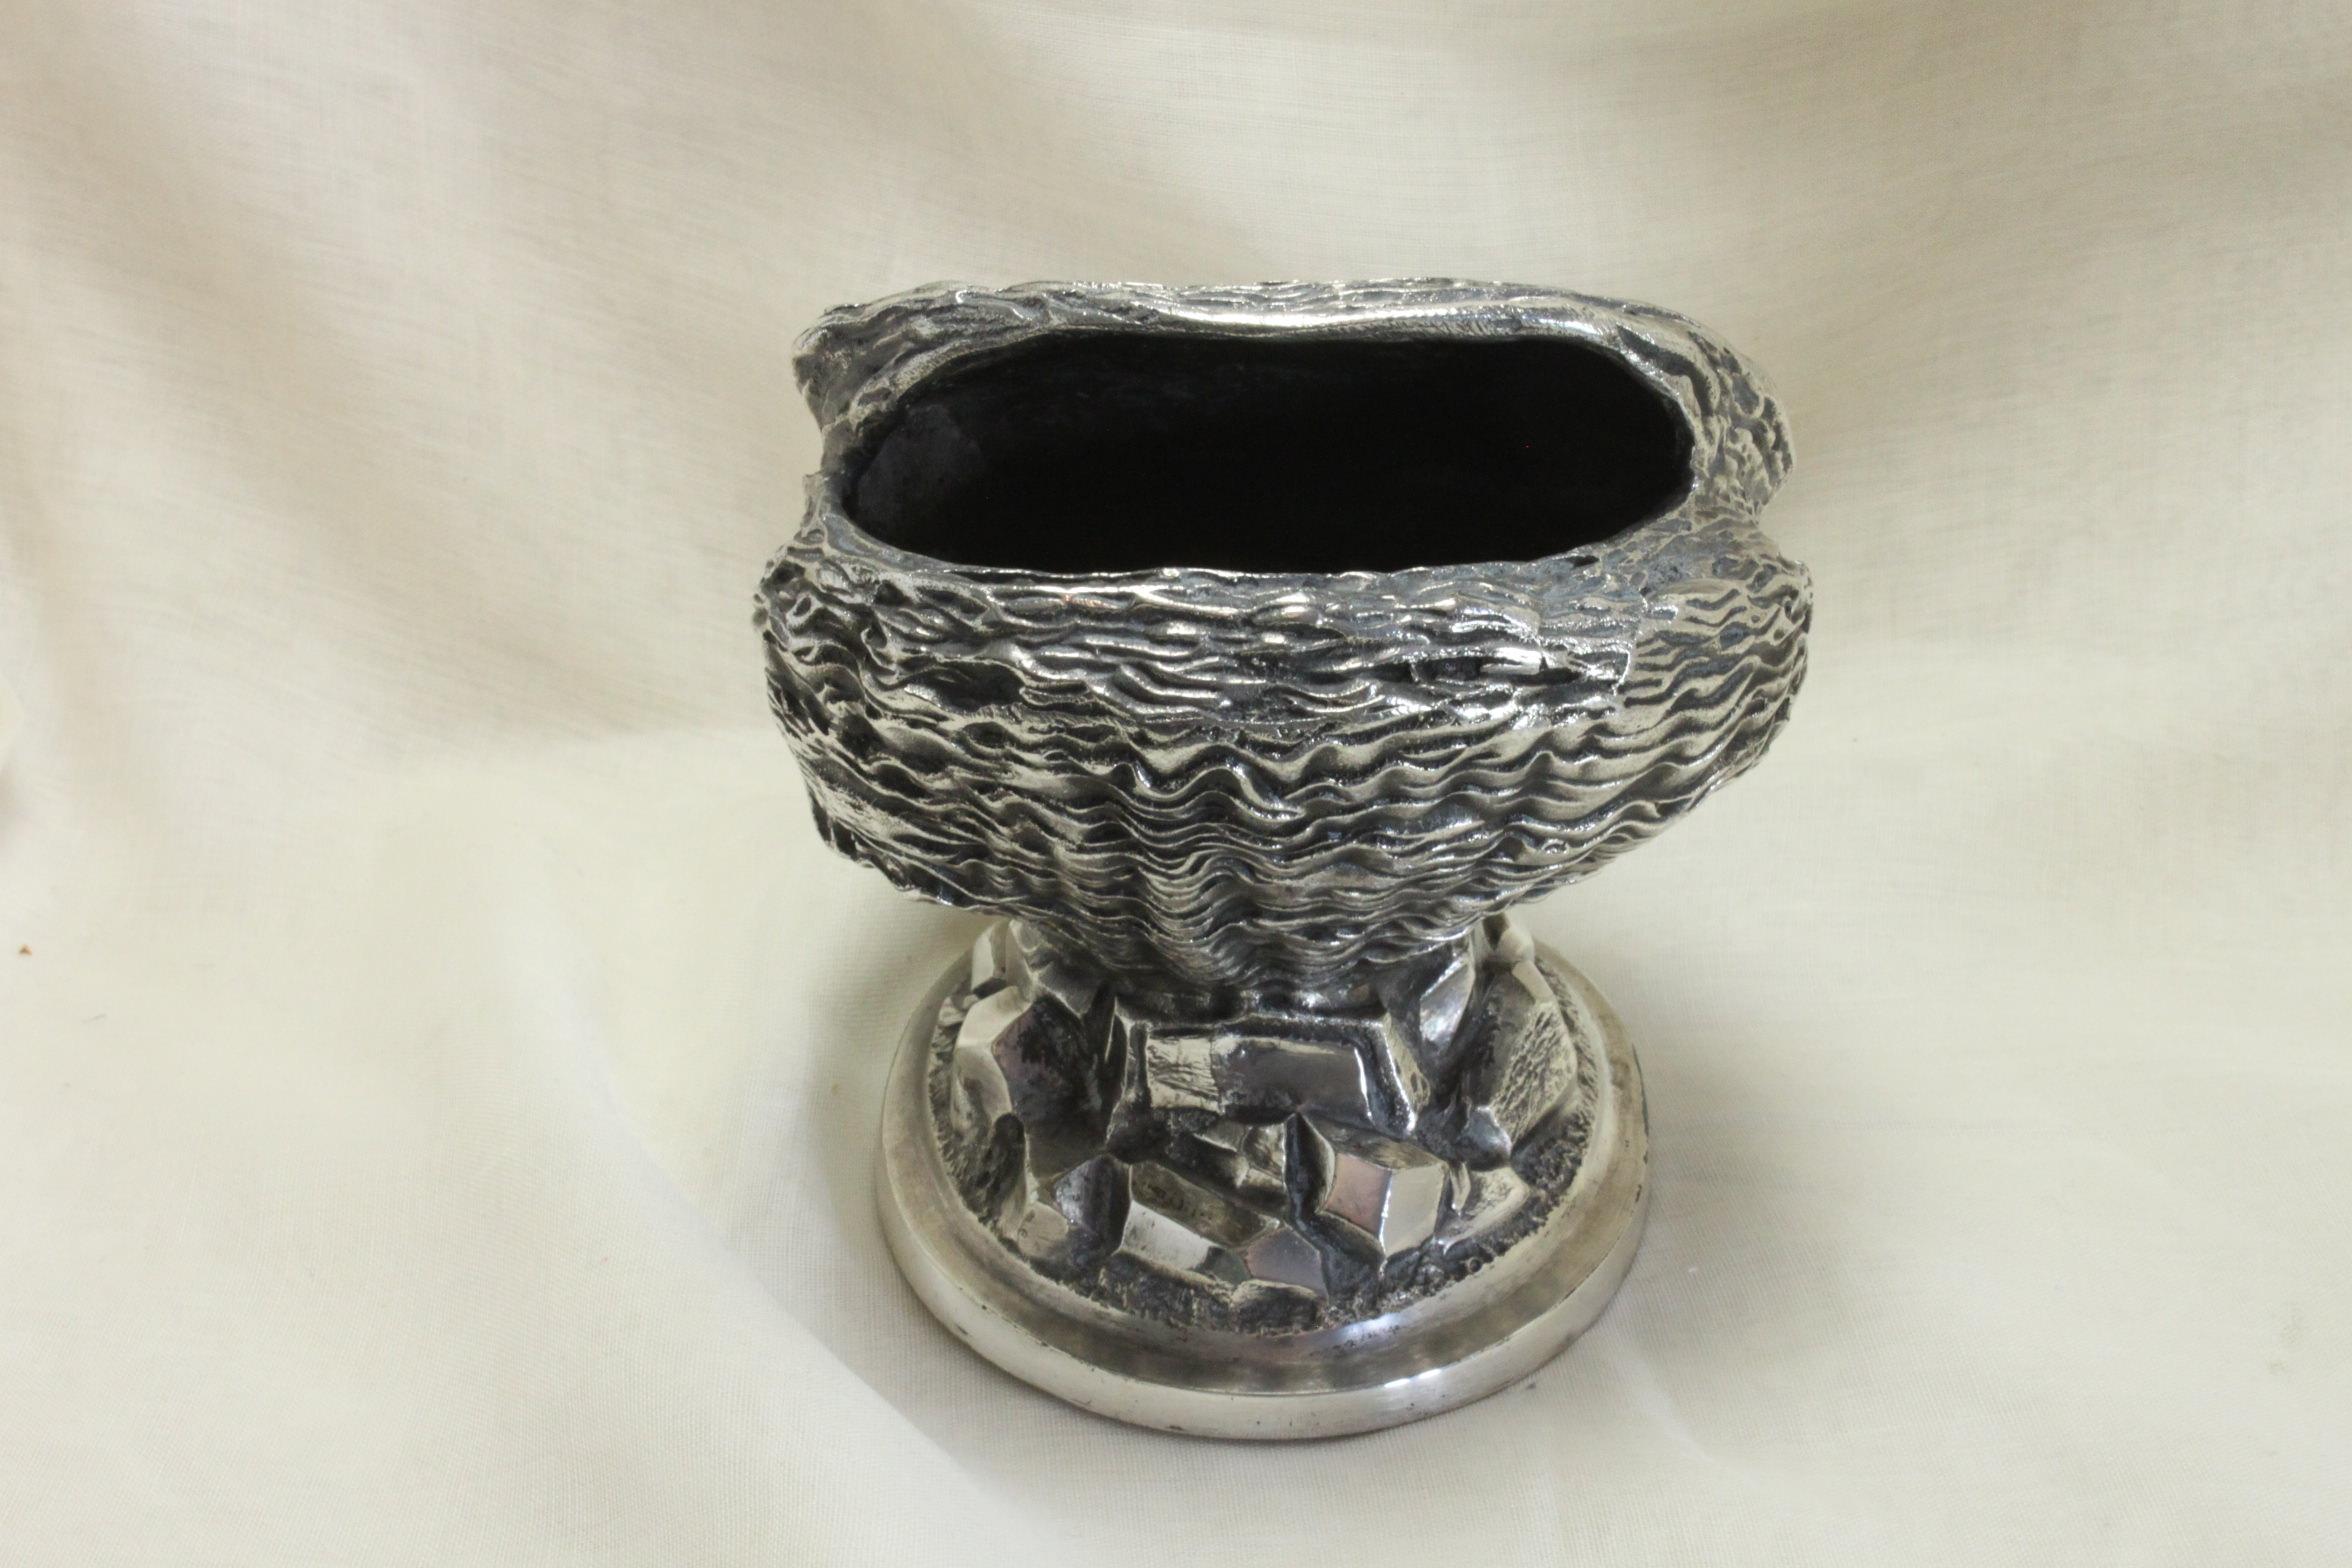 This good quality silverplate spoon warmer is realistically fashioned in the shape of an oyster shell sitting on a rock. It is unmarked but the quality is reflected in the detail of the casting, the weight of 1.15 kgs (2.5 lbs) and the pad on the